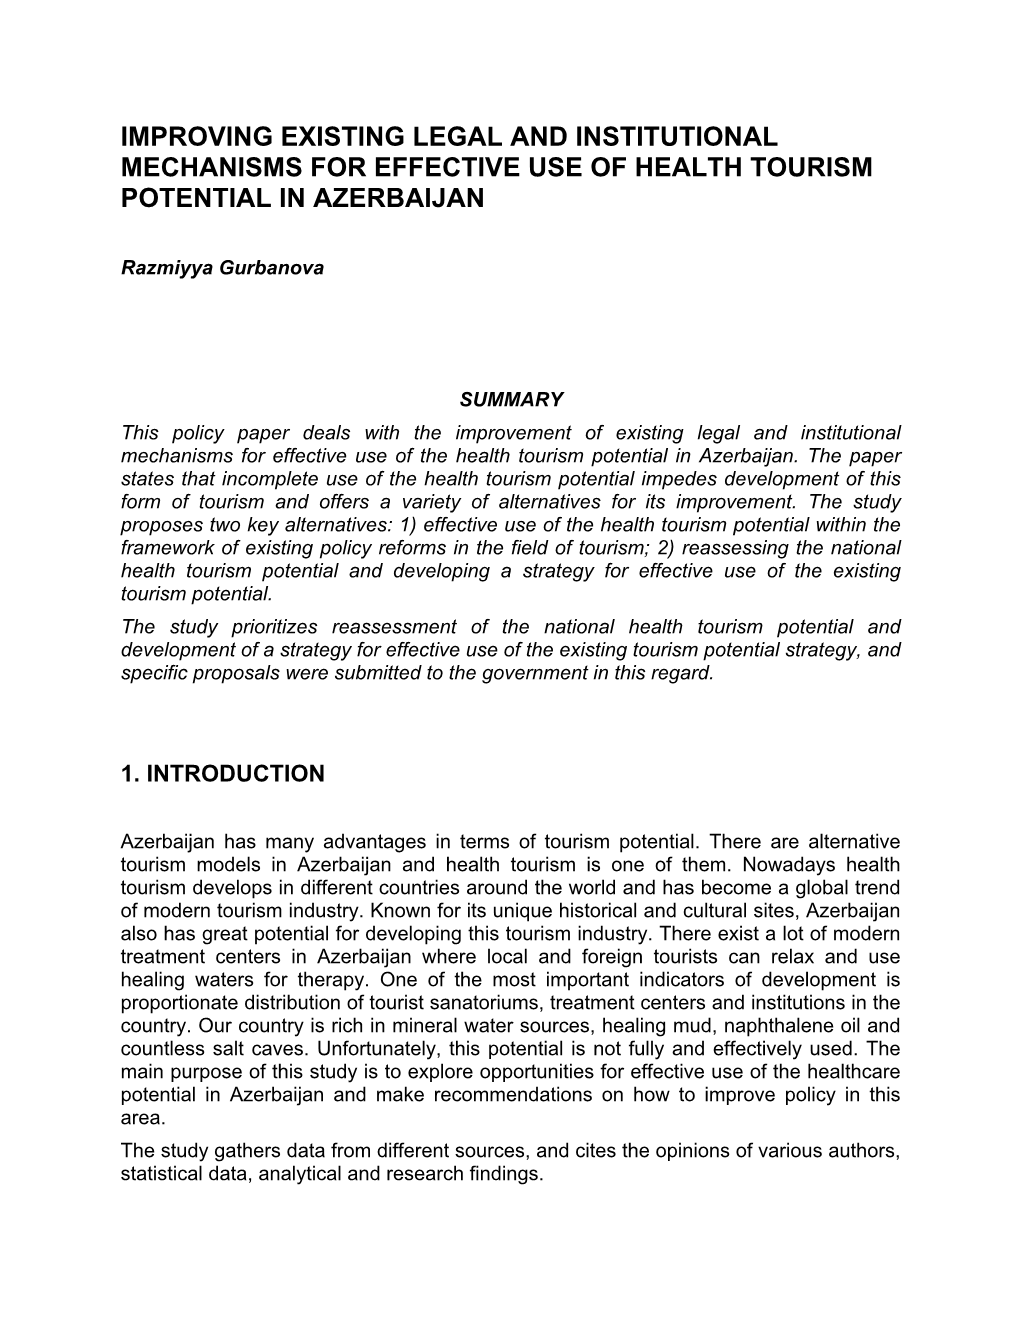 Improving Existing Legal and Institutional Mechanisms for Effective Use of Health Tourism Potential in Azerbaijan